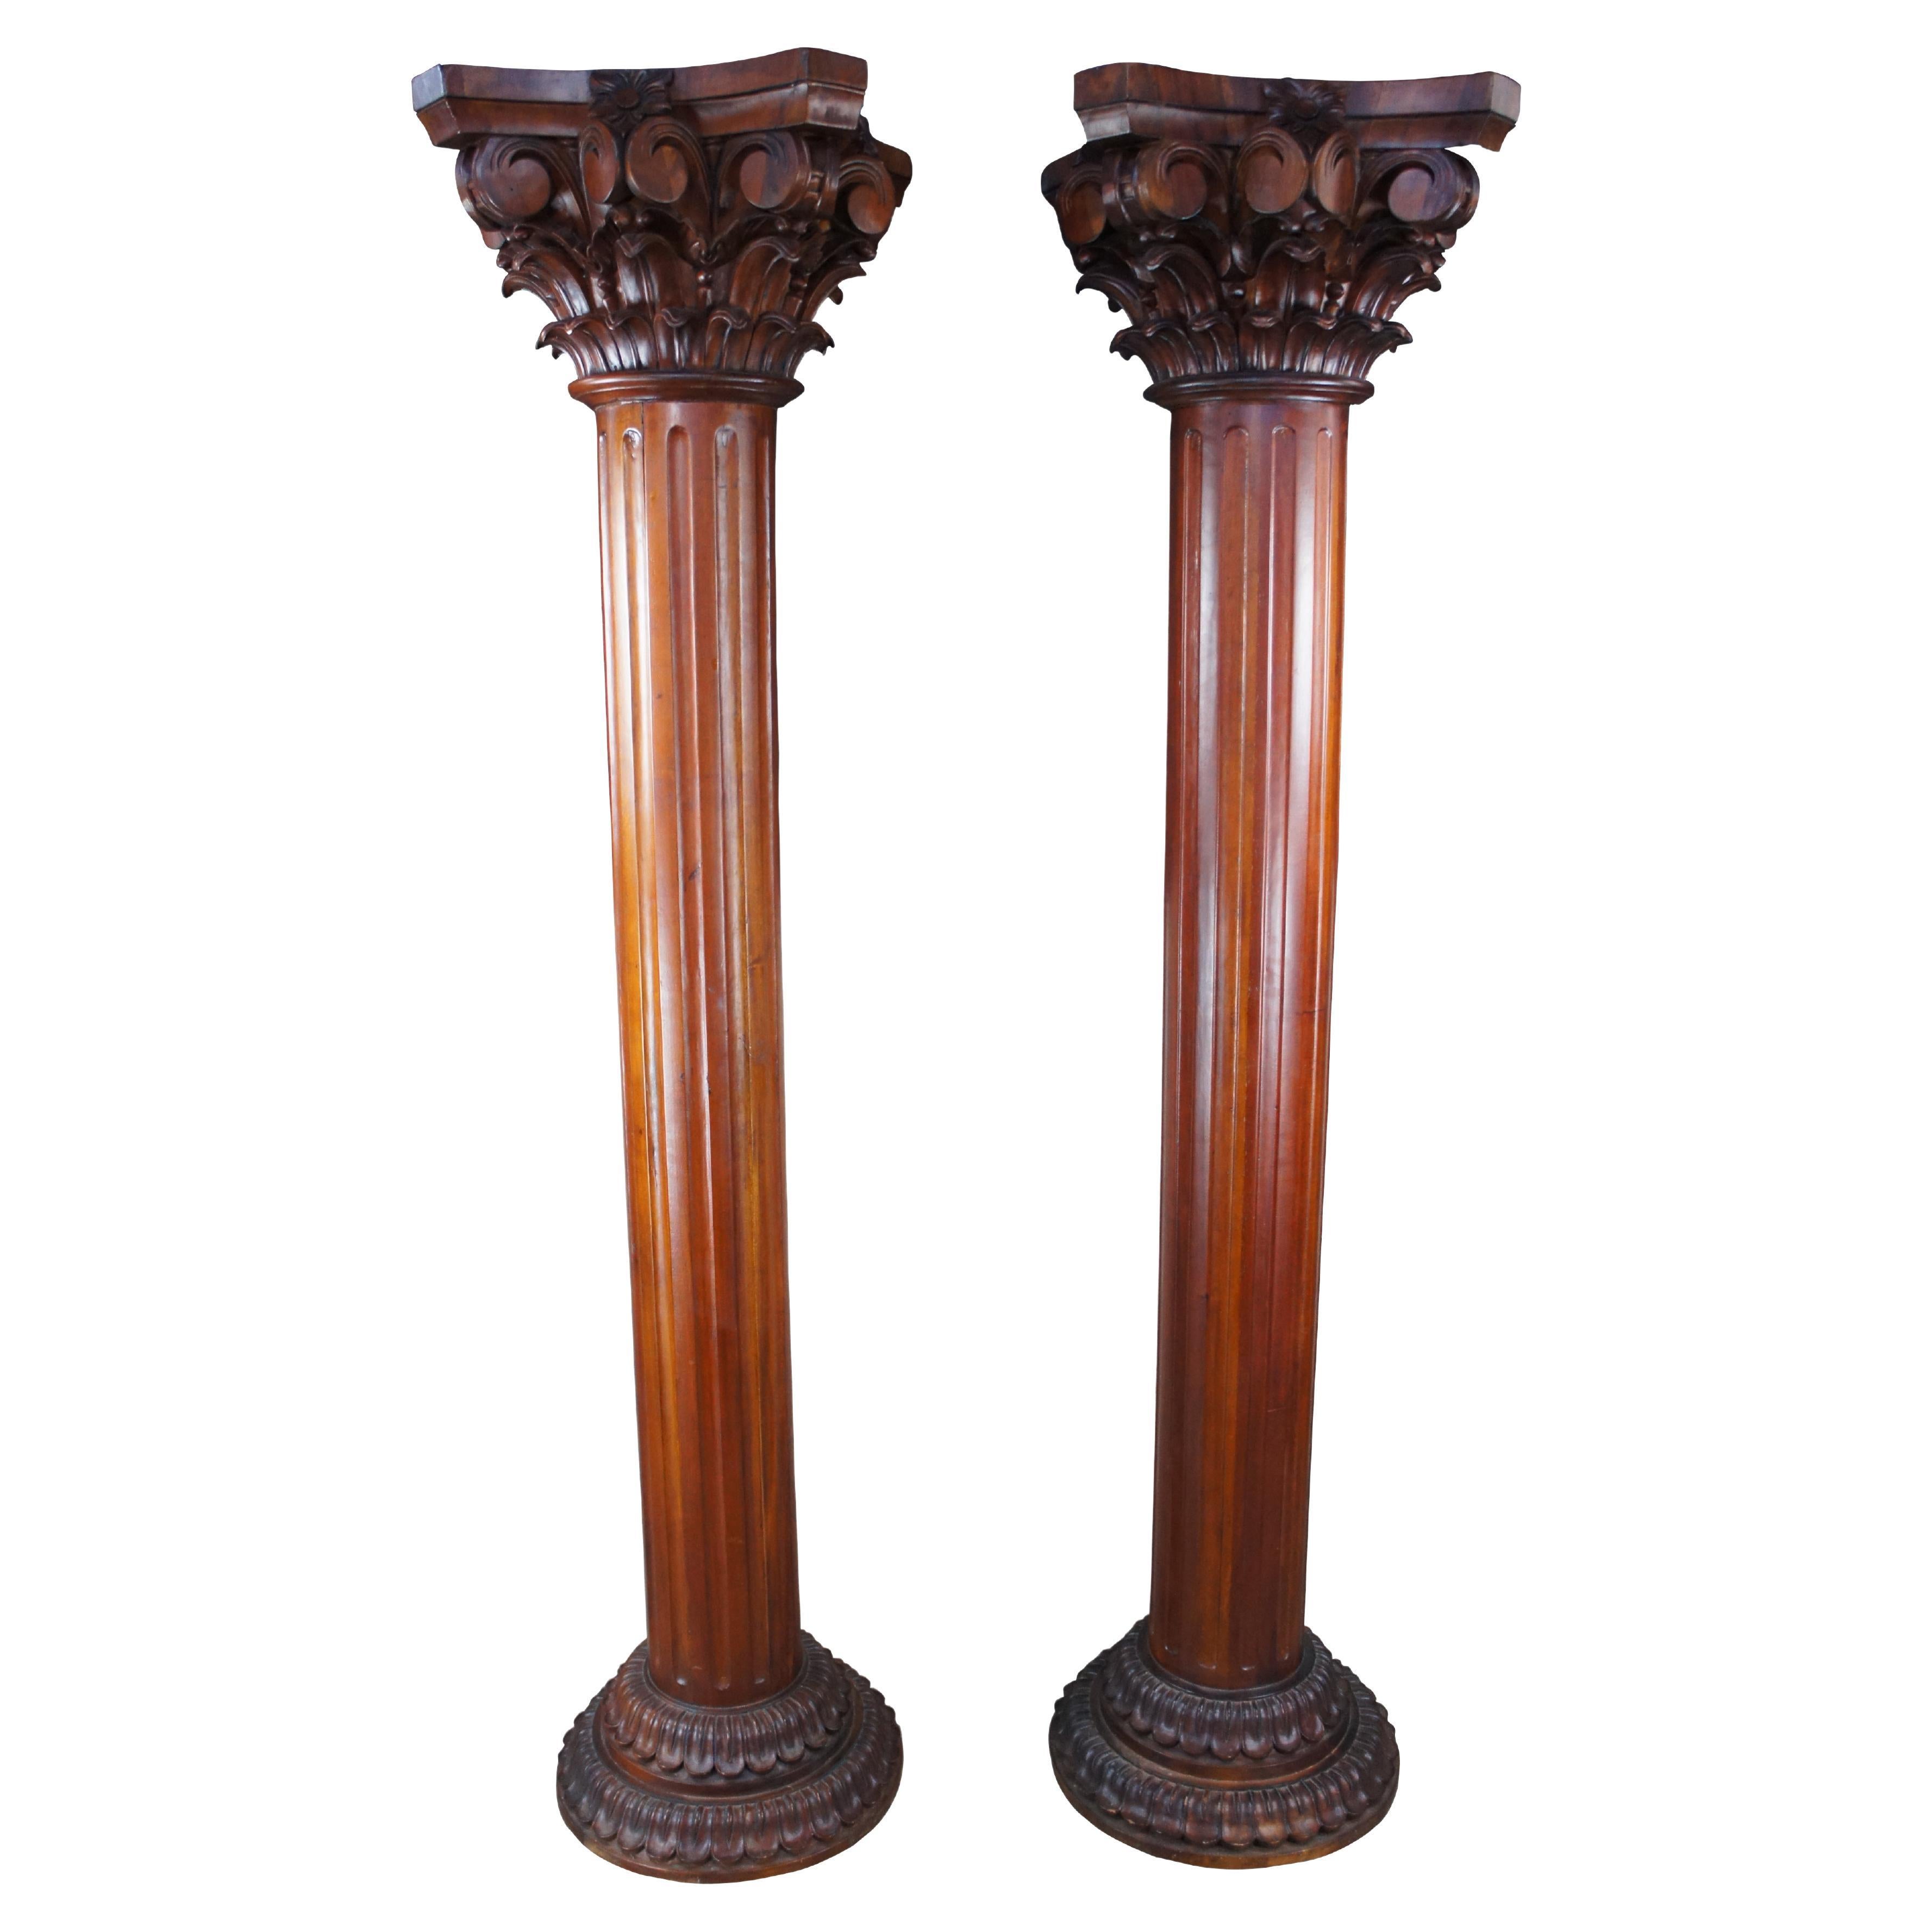 2 Monumental Neo-Grec Classical Fluted Columns with Corinthian Capitals Pair 92" For Sale